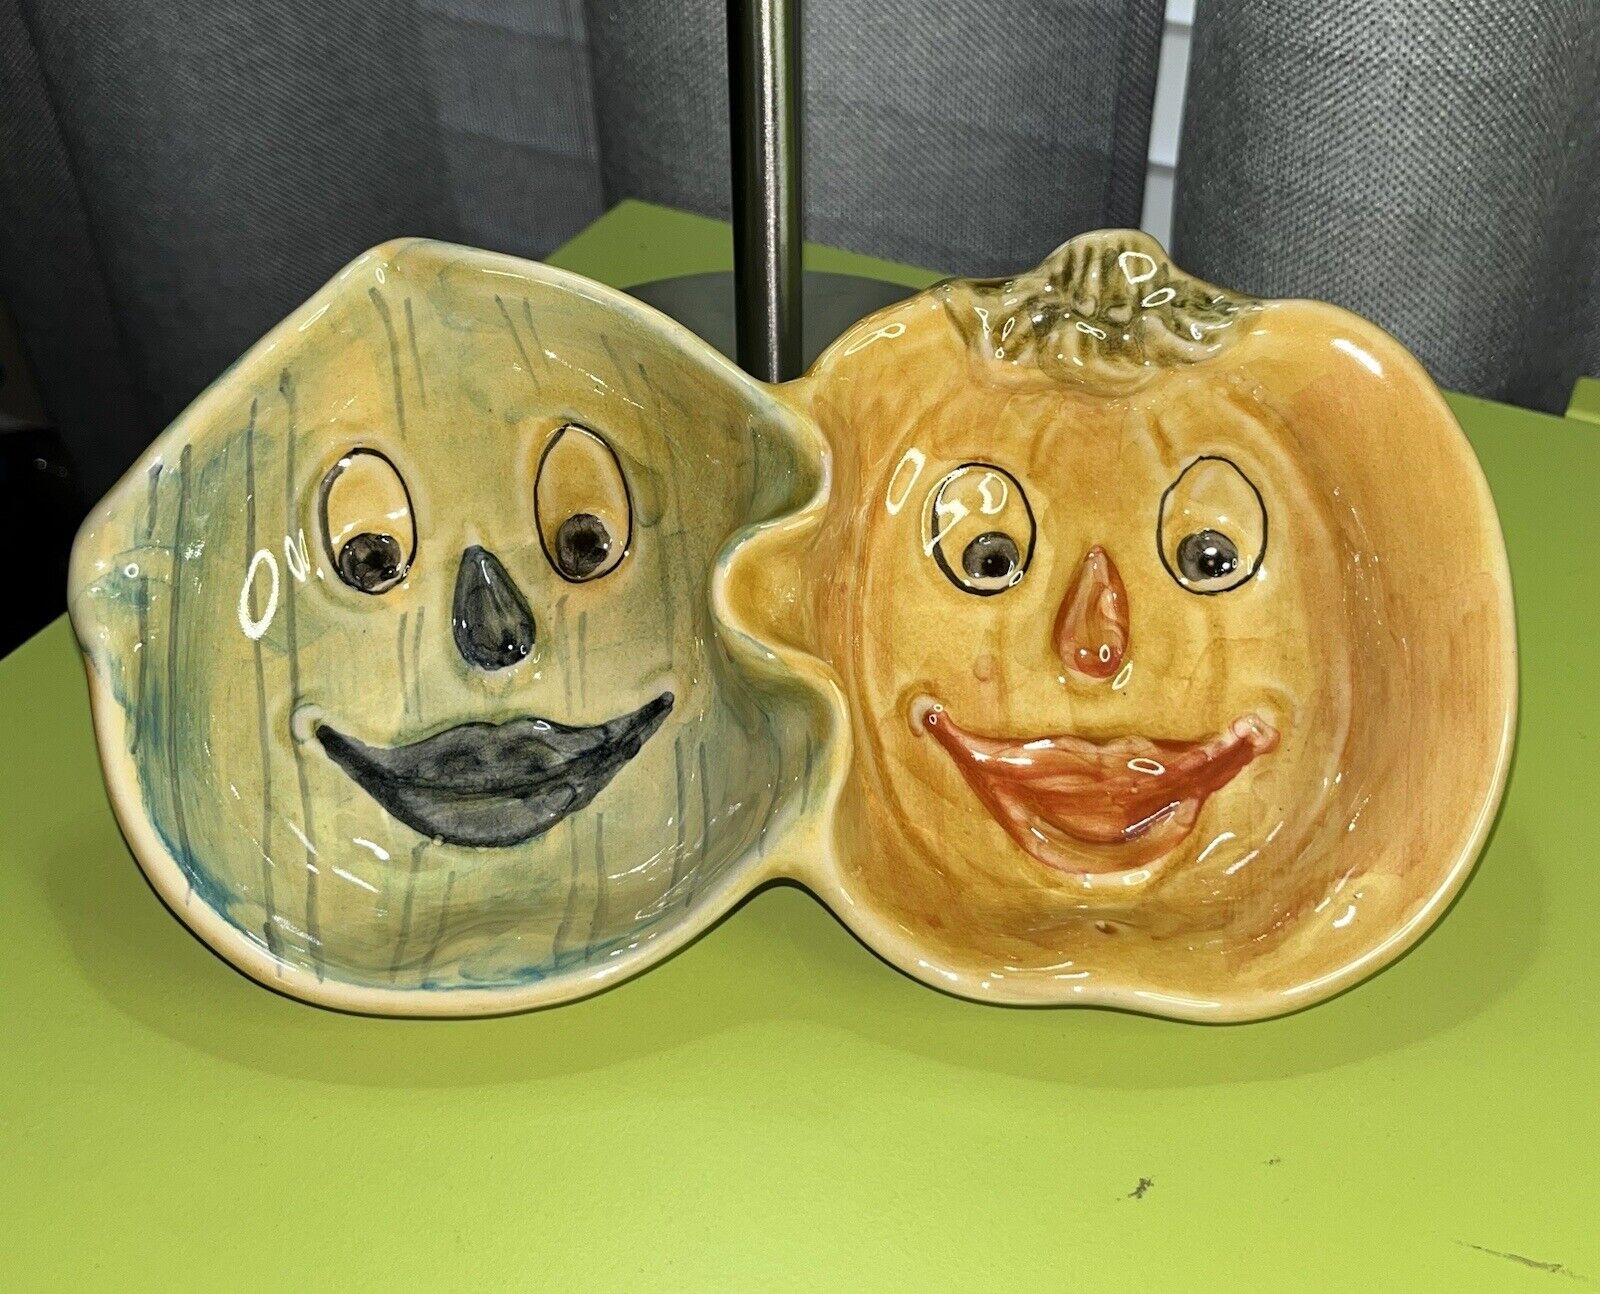 VTG RARE Anthropomorphic Pumpkin Candy Dishes Made/Italy Porcelain Hand Painted